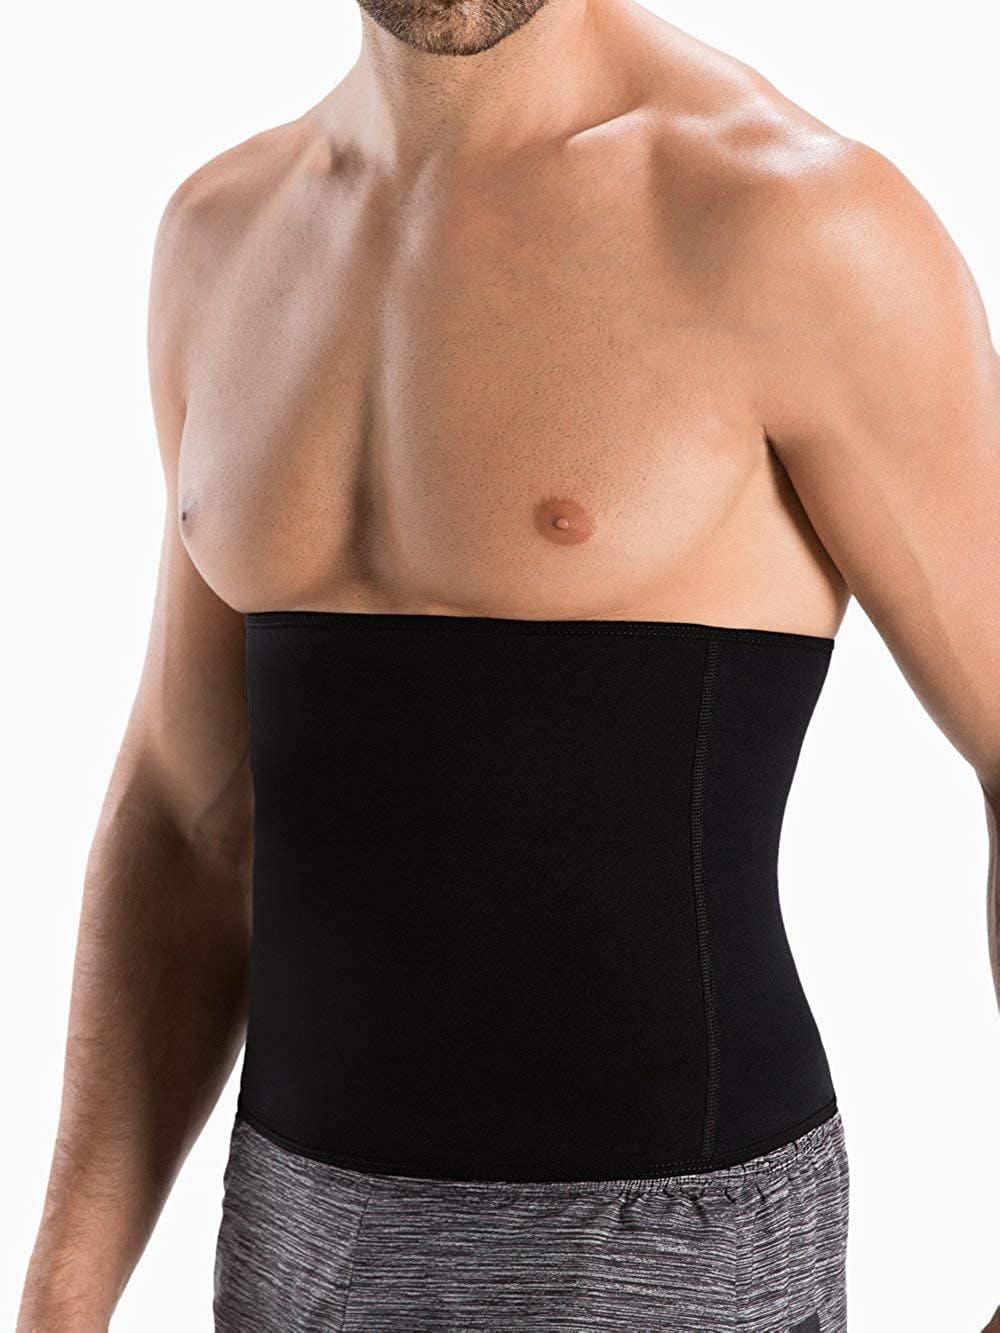 Cryolipolysis Manual Hot Shaper Slim Sweat Belt, For Gym, Waist Size: Free  at Rs 30 in Meerut